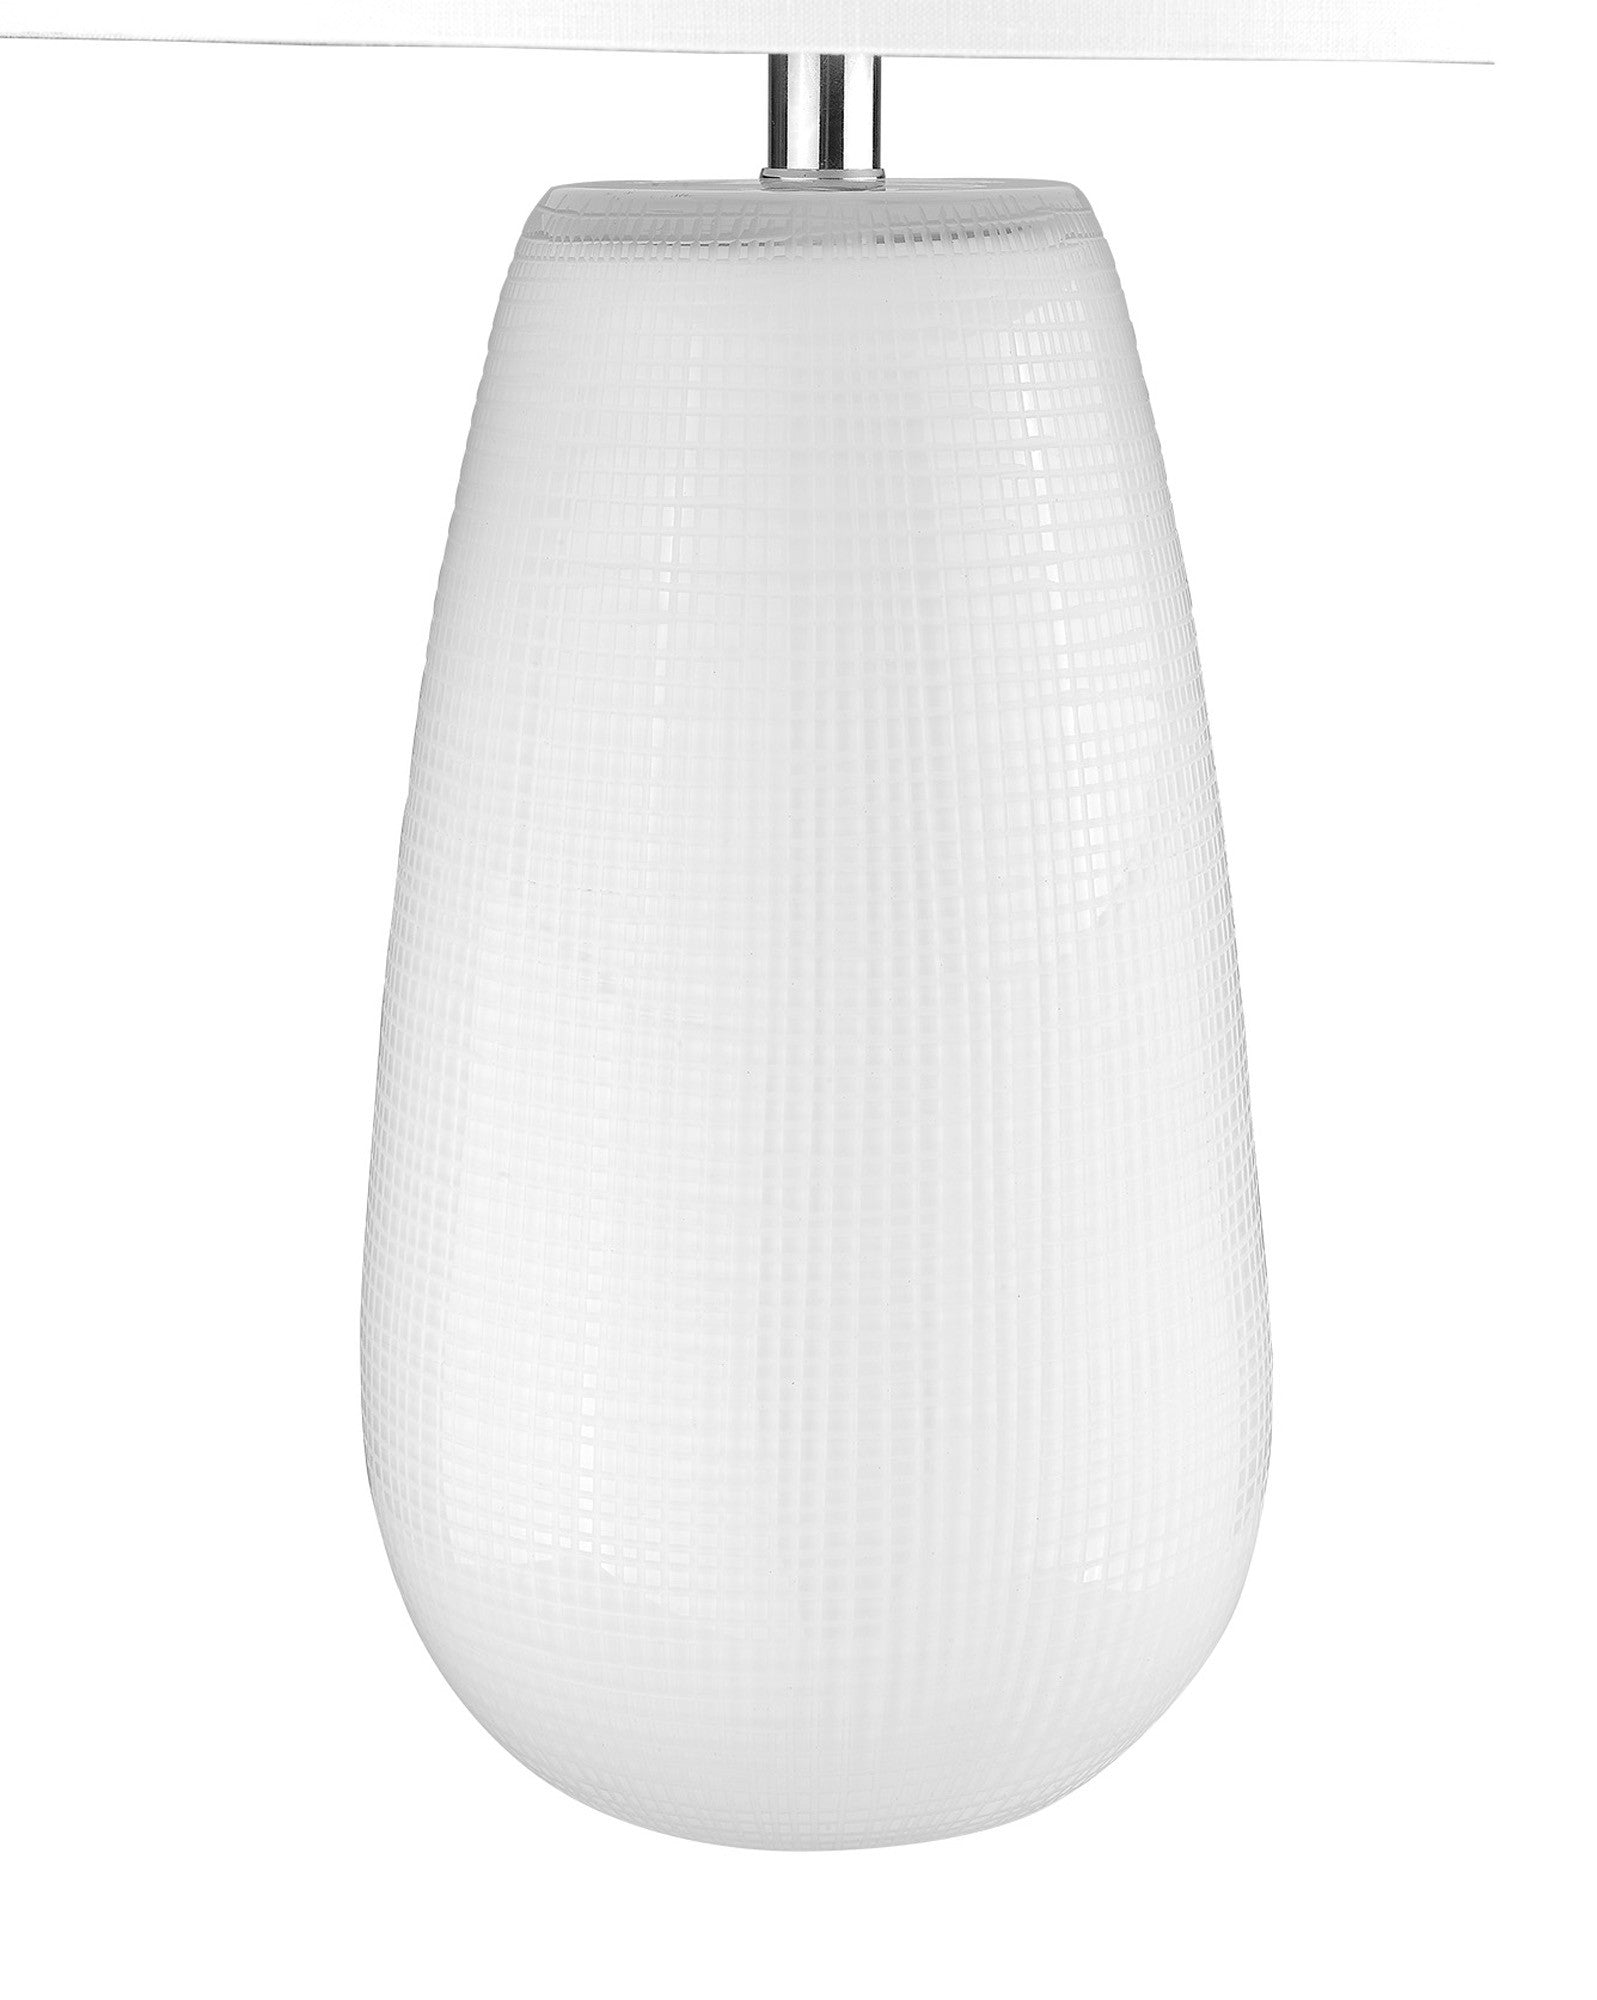 28" White Ceramic Column Table Lamp With White Drum Shade